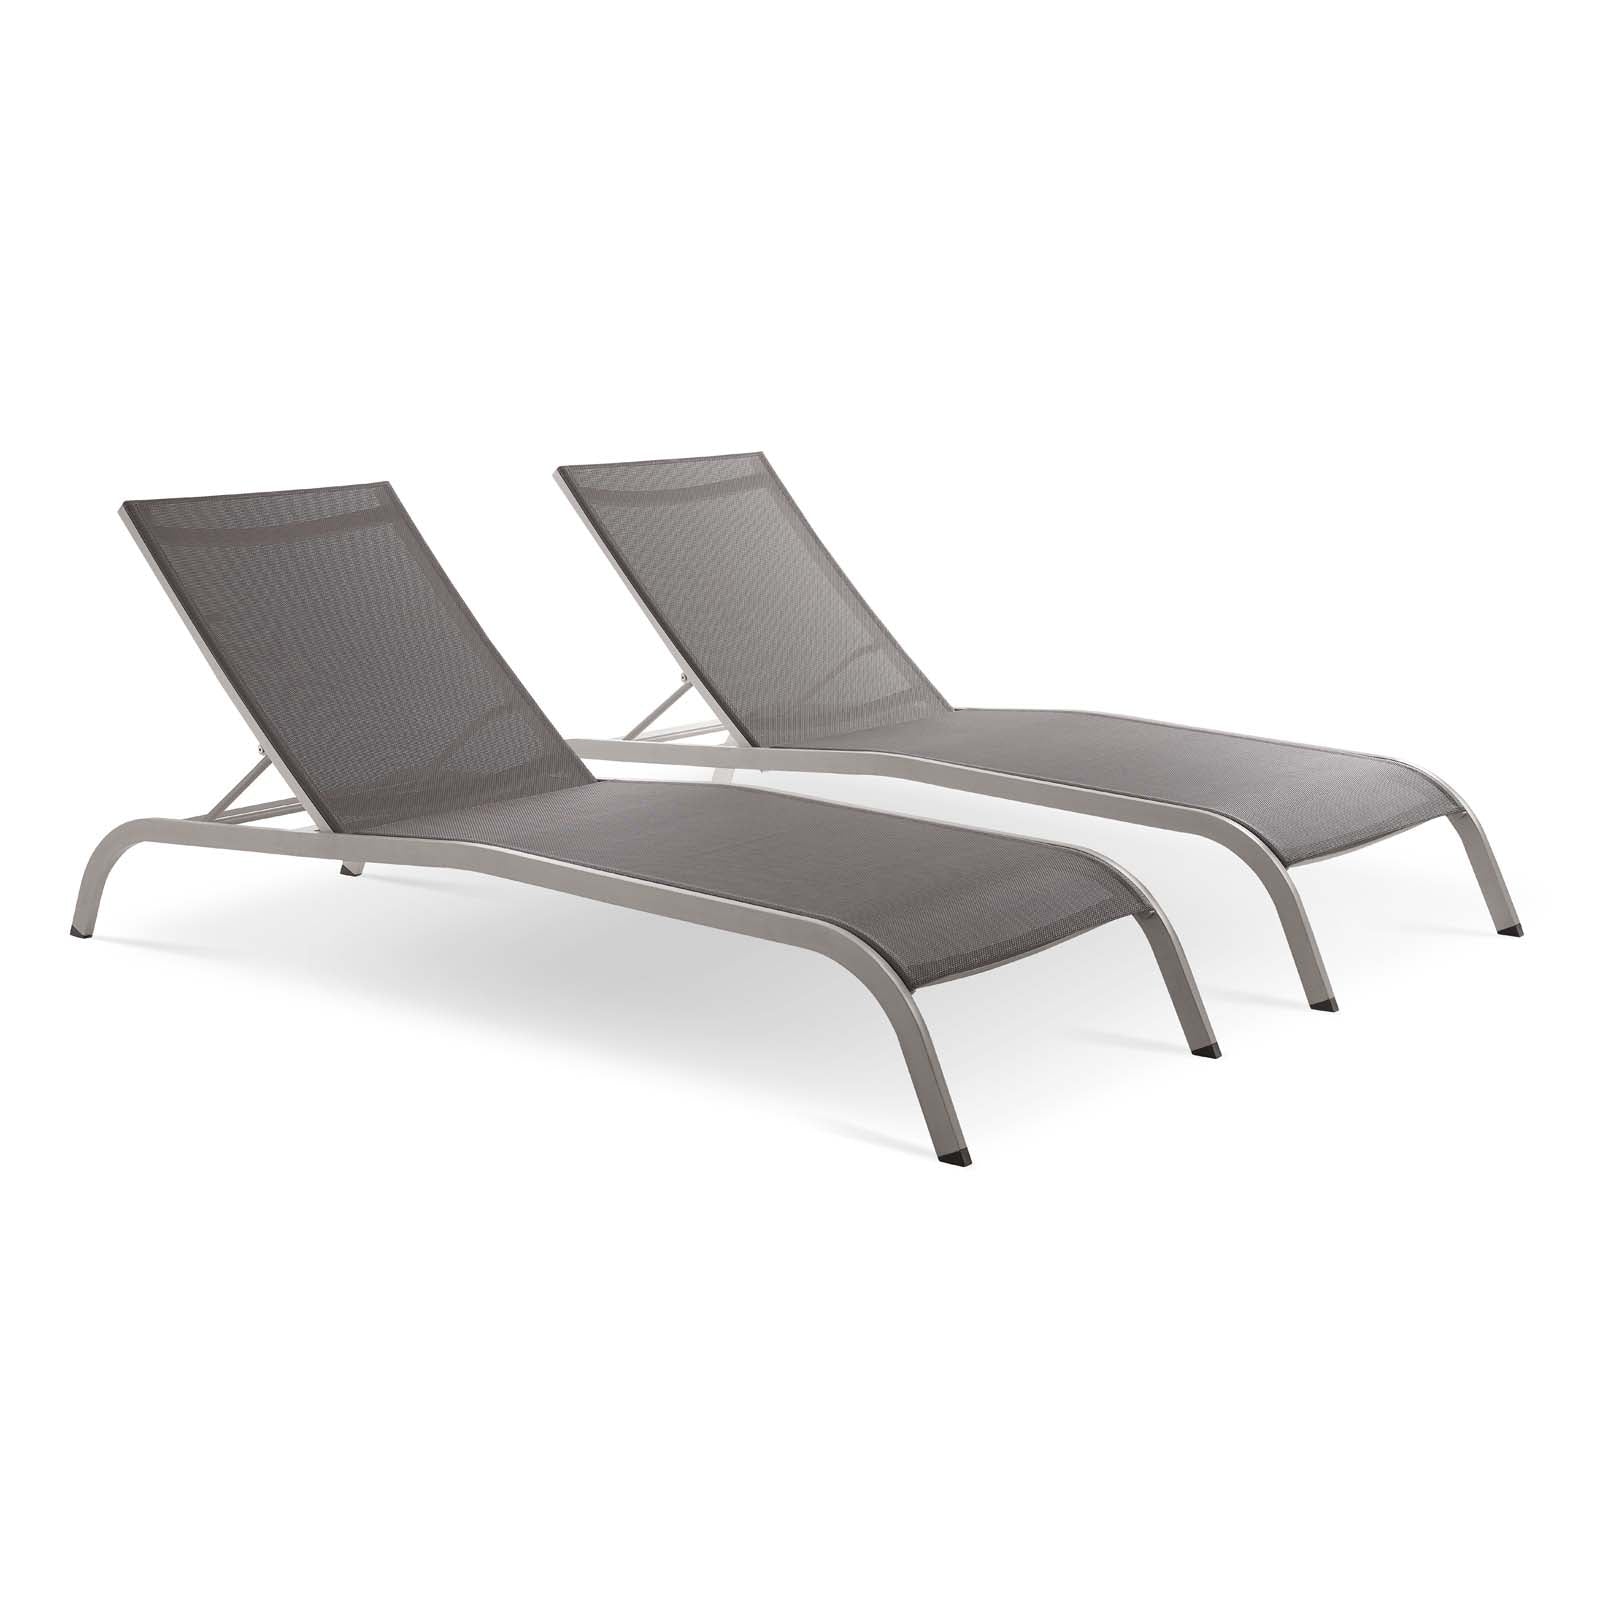 Savannah Outdoor Patio Mesh Chaise Lounge Set of 2-Outdoor Set-Modway-Wall2Wall Furnishings